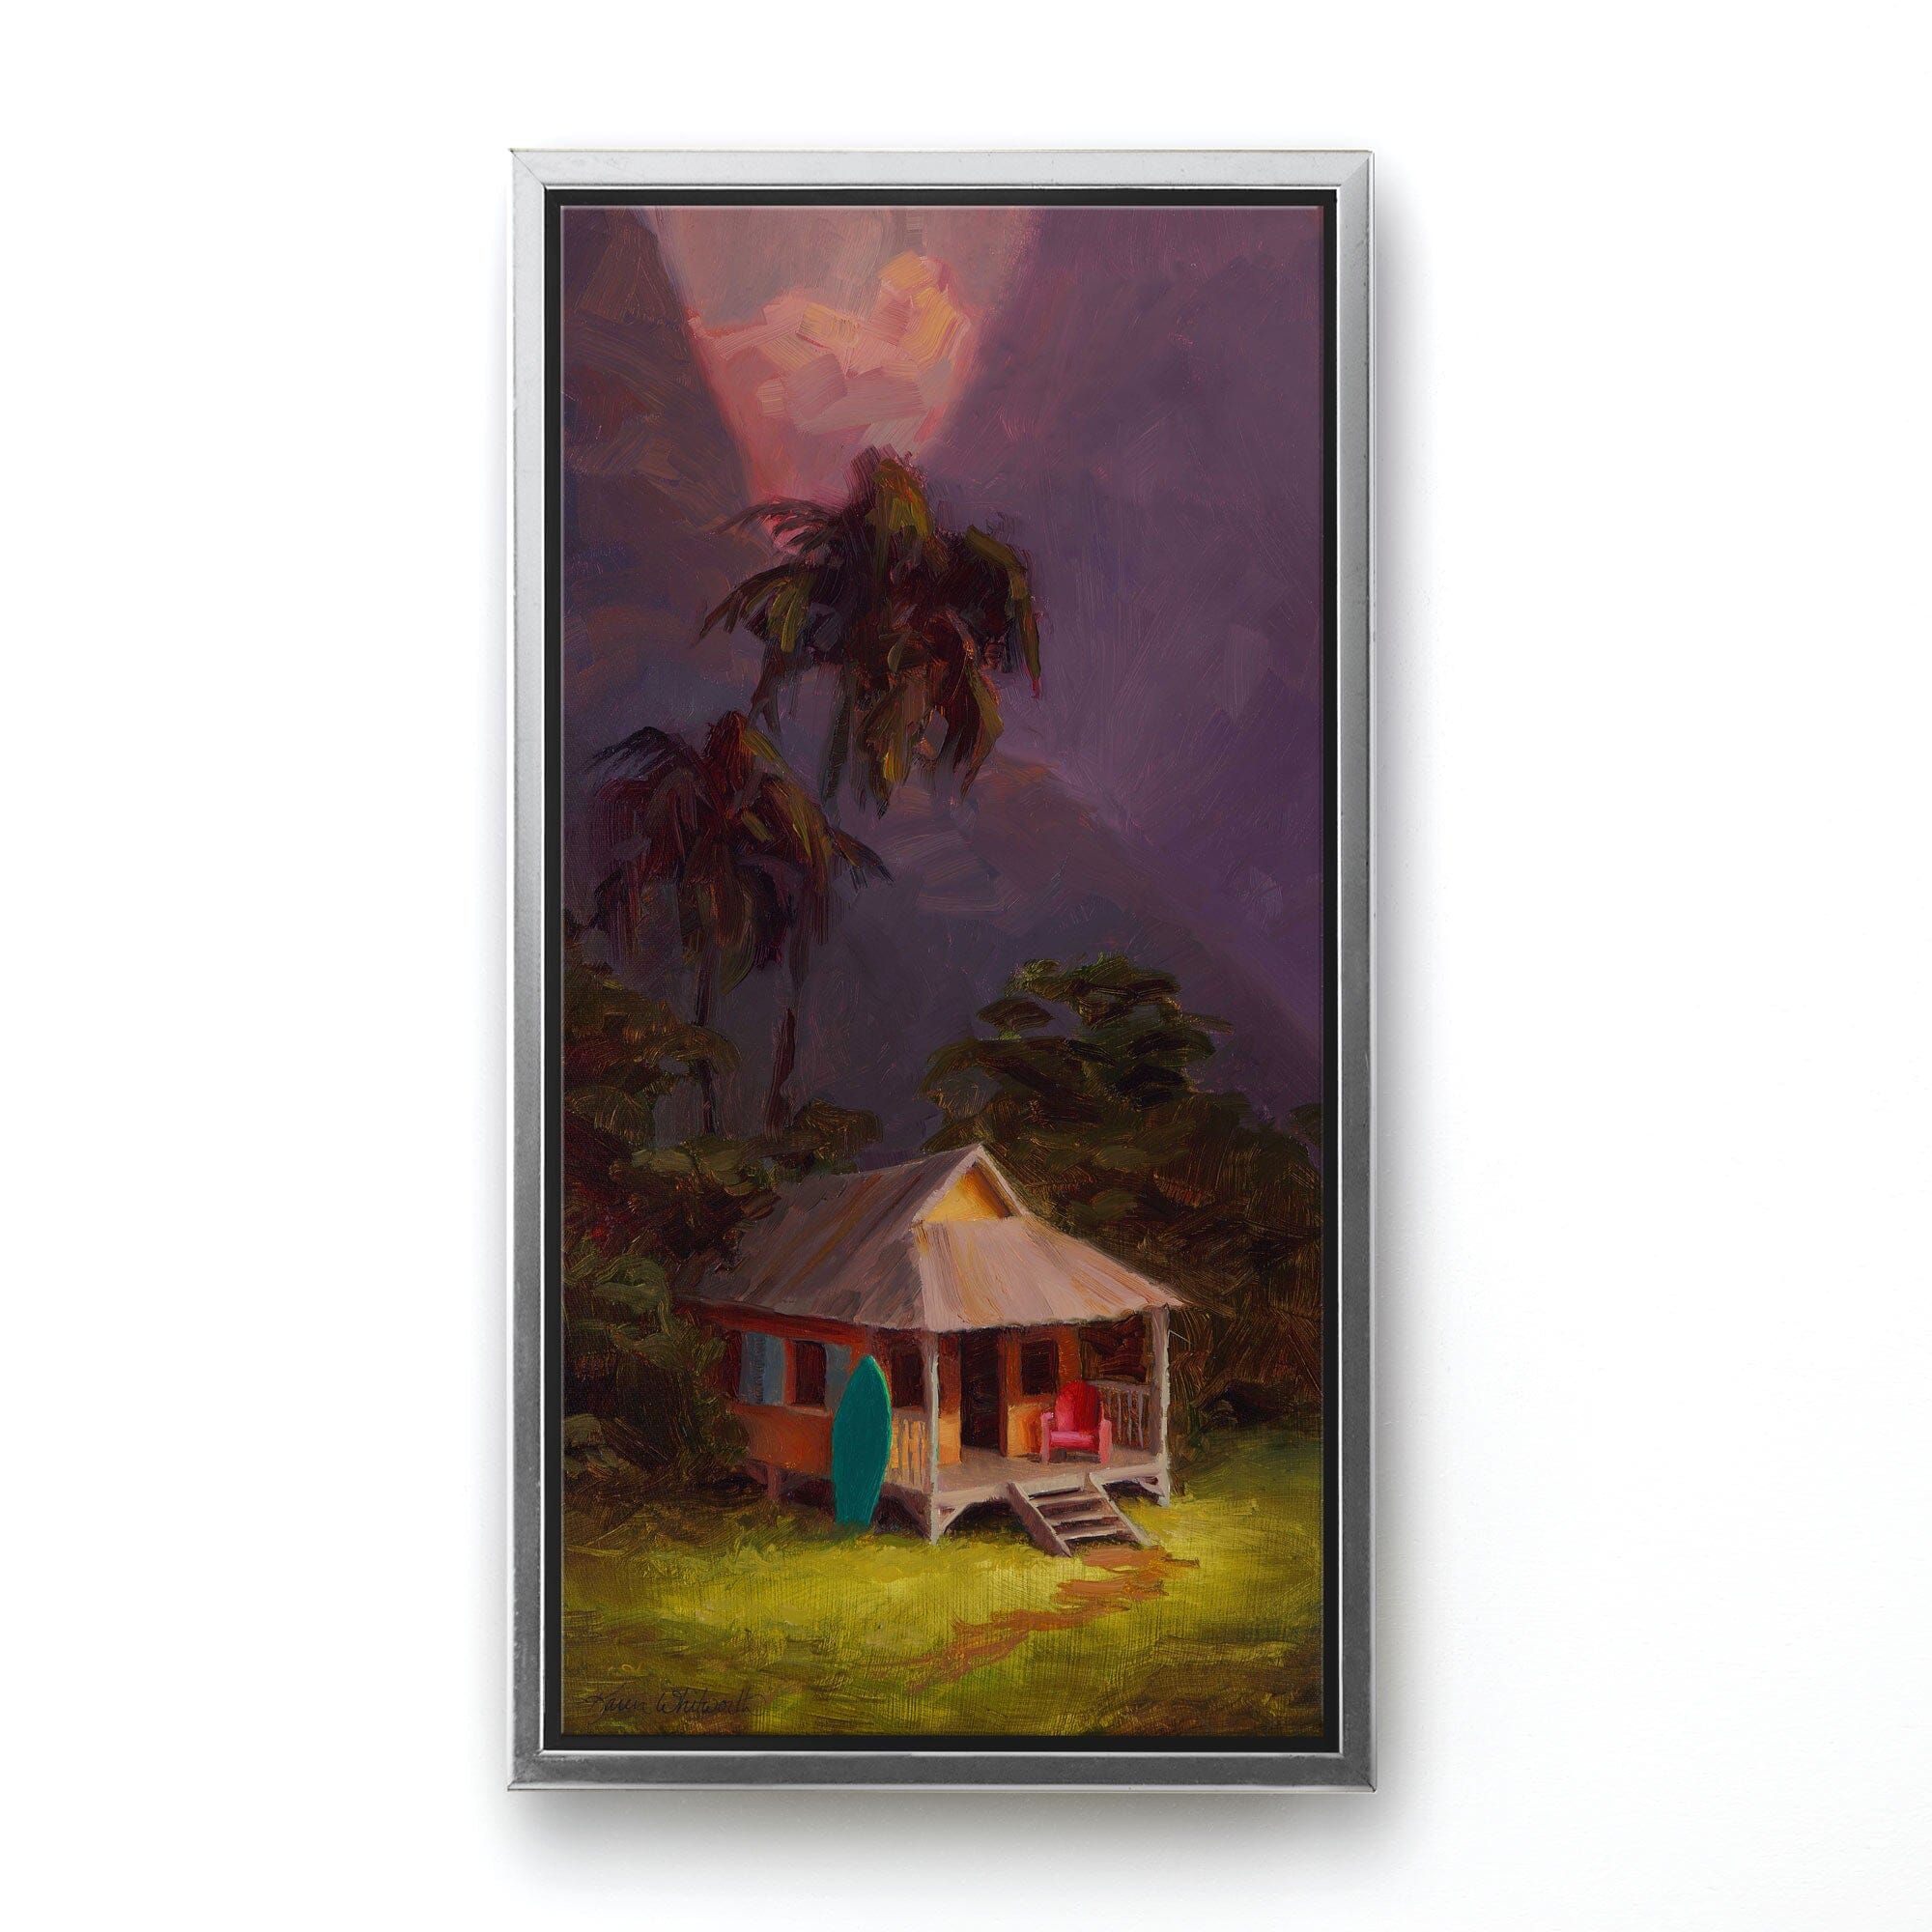 Old Hawaiian Landscape Painting - Canvas Wall Art Print of Tropical Paradise Cottage